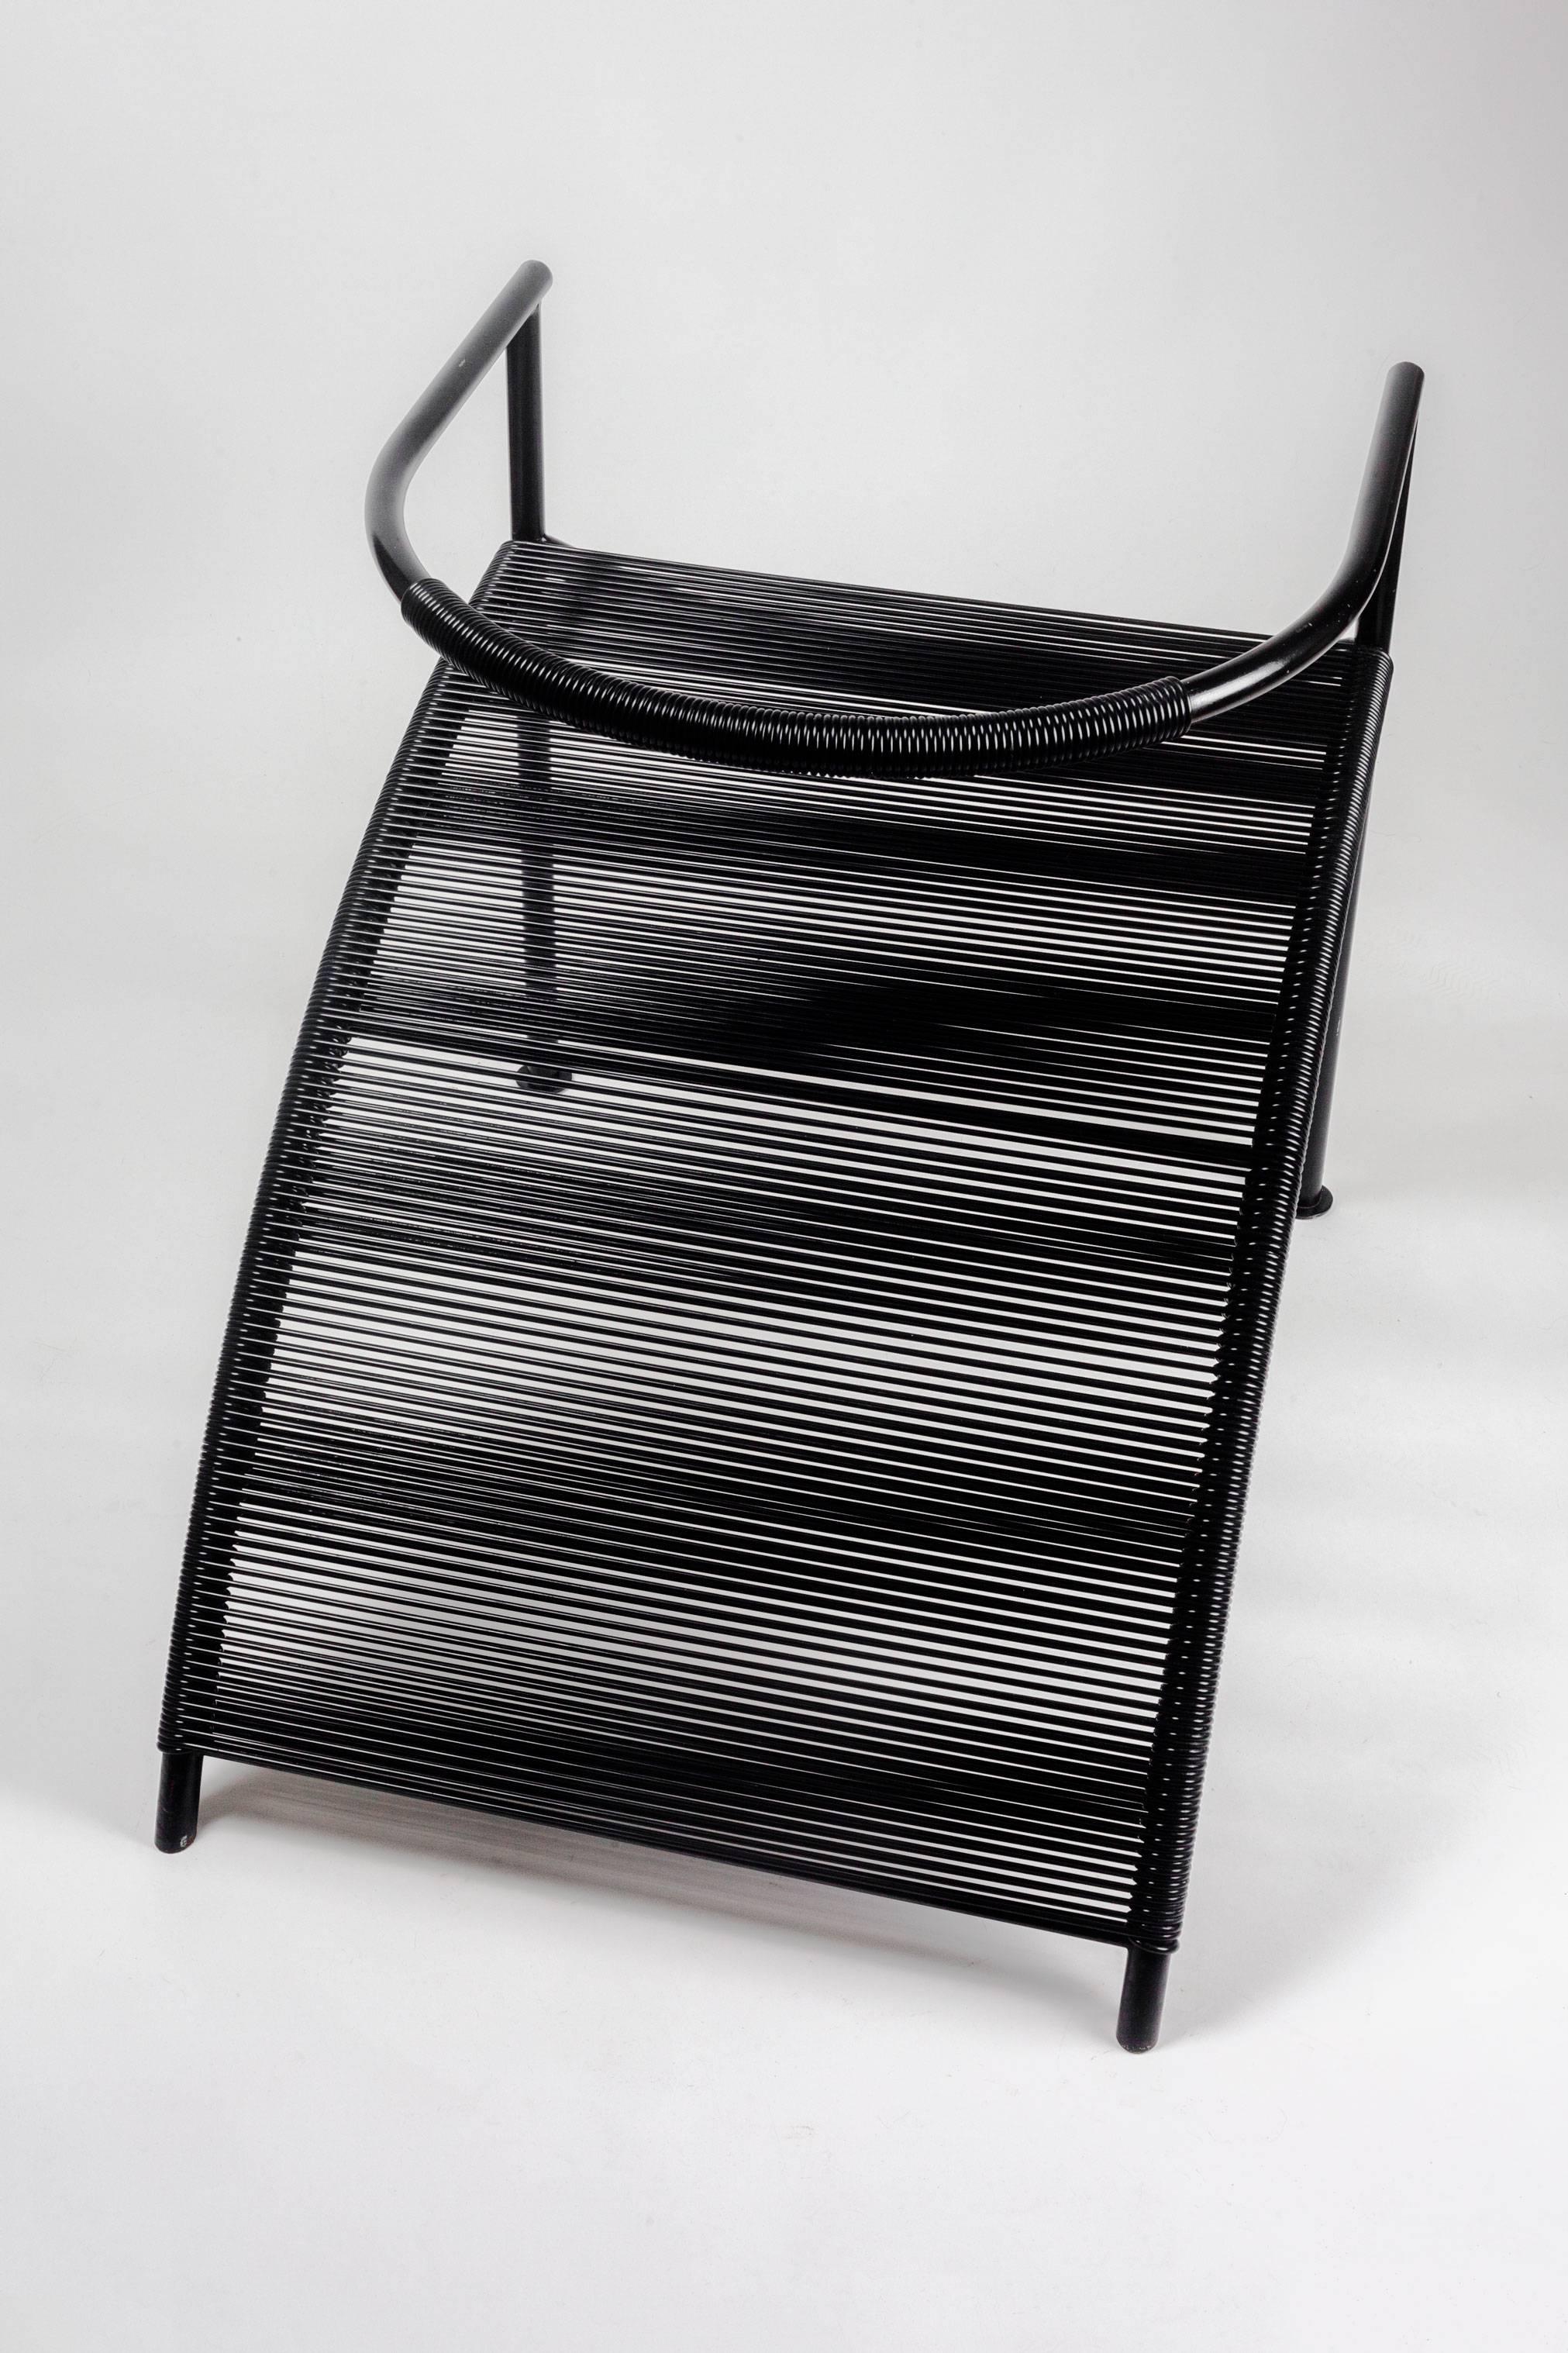 Steel Sculptural Chair by Philippe Starck for XO Paris, Black Metal and strings, 1980s